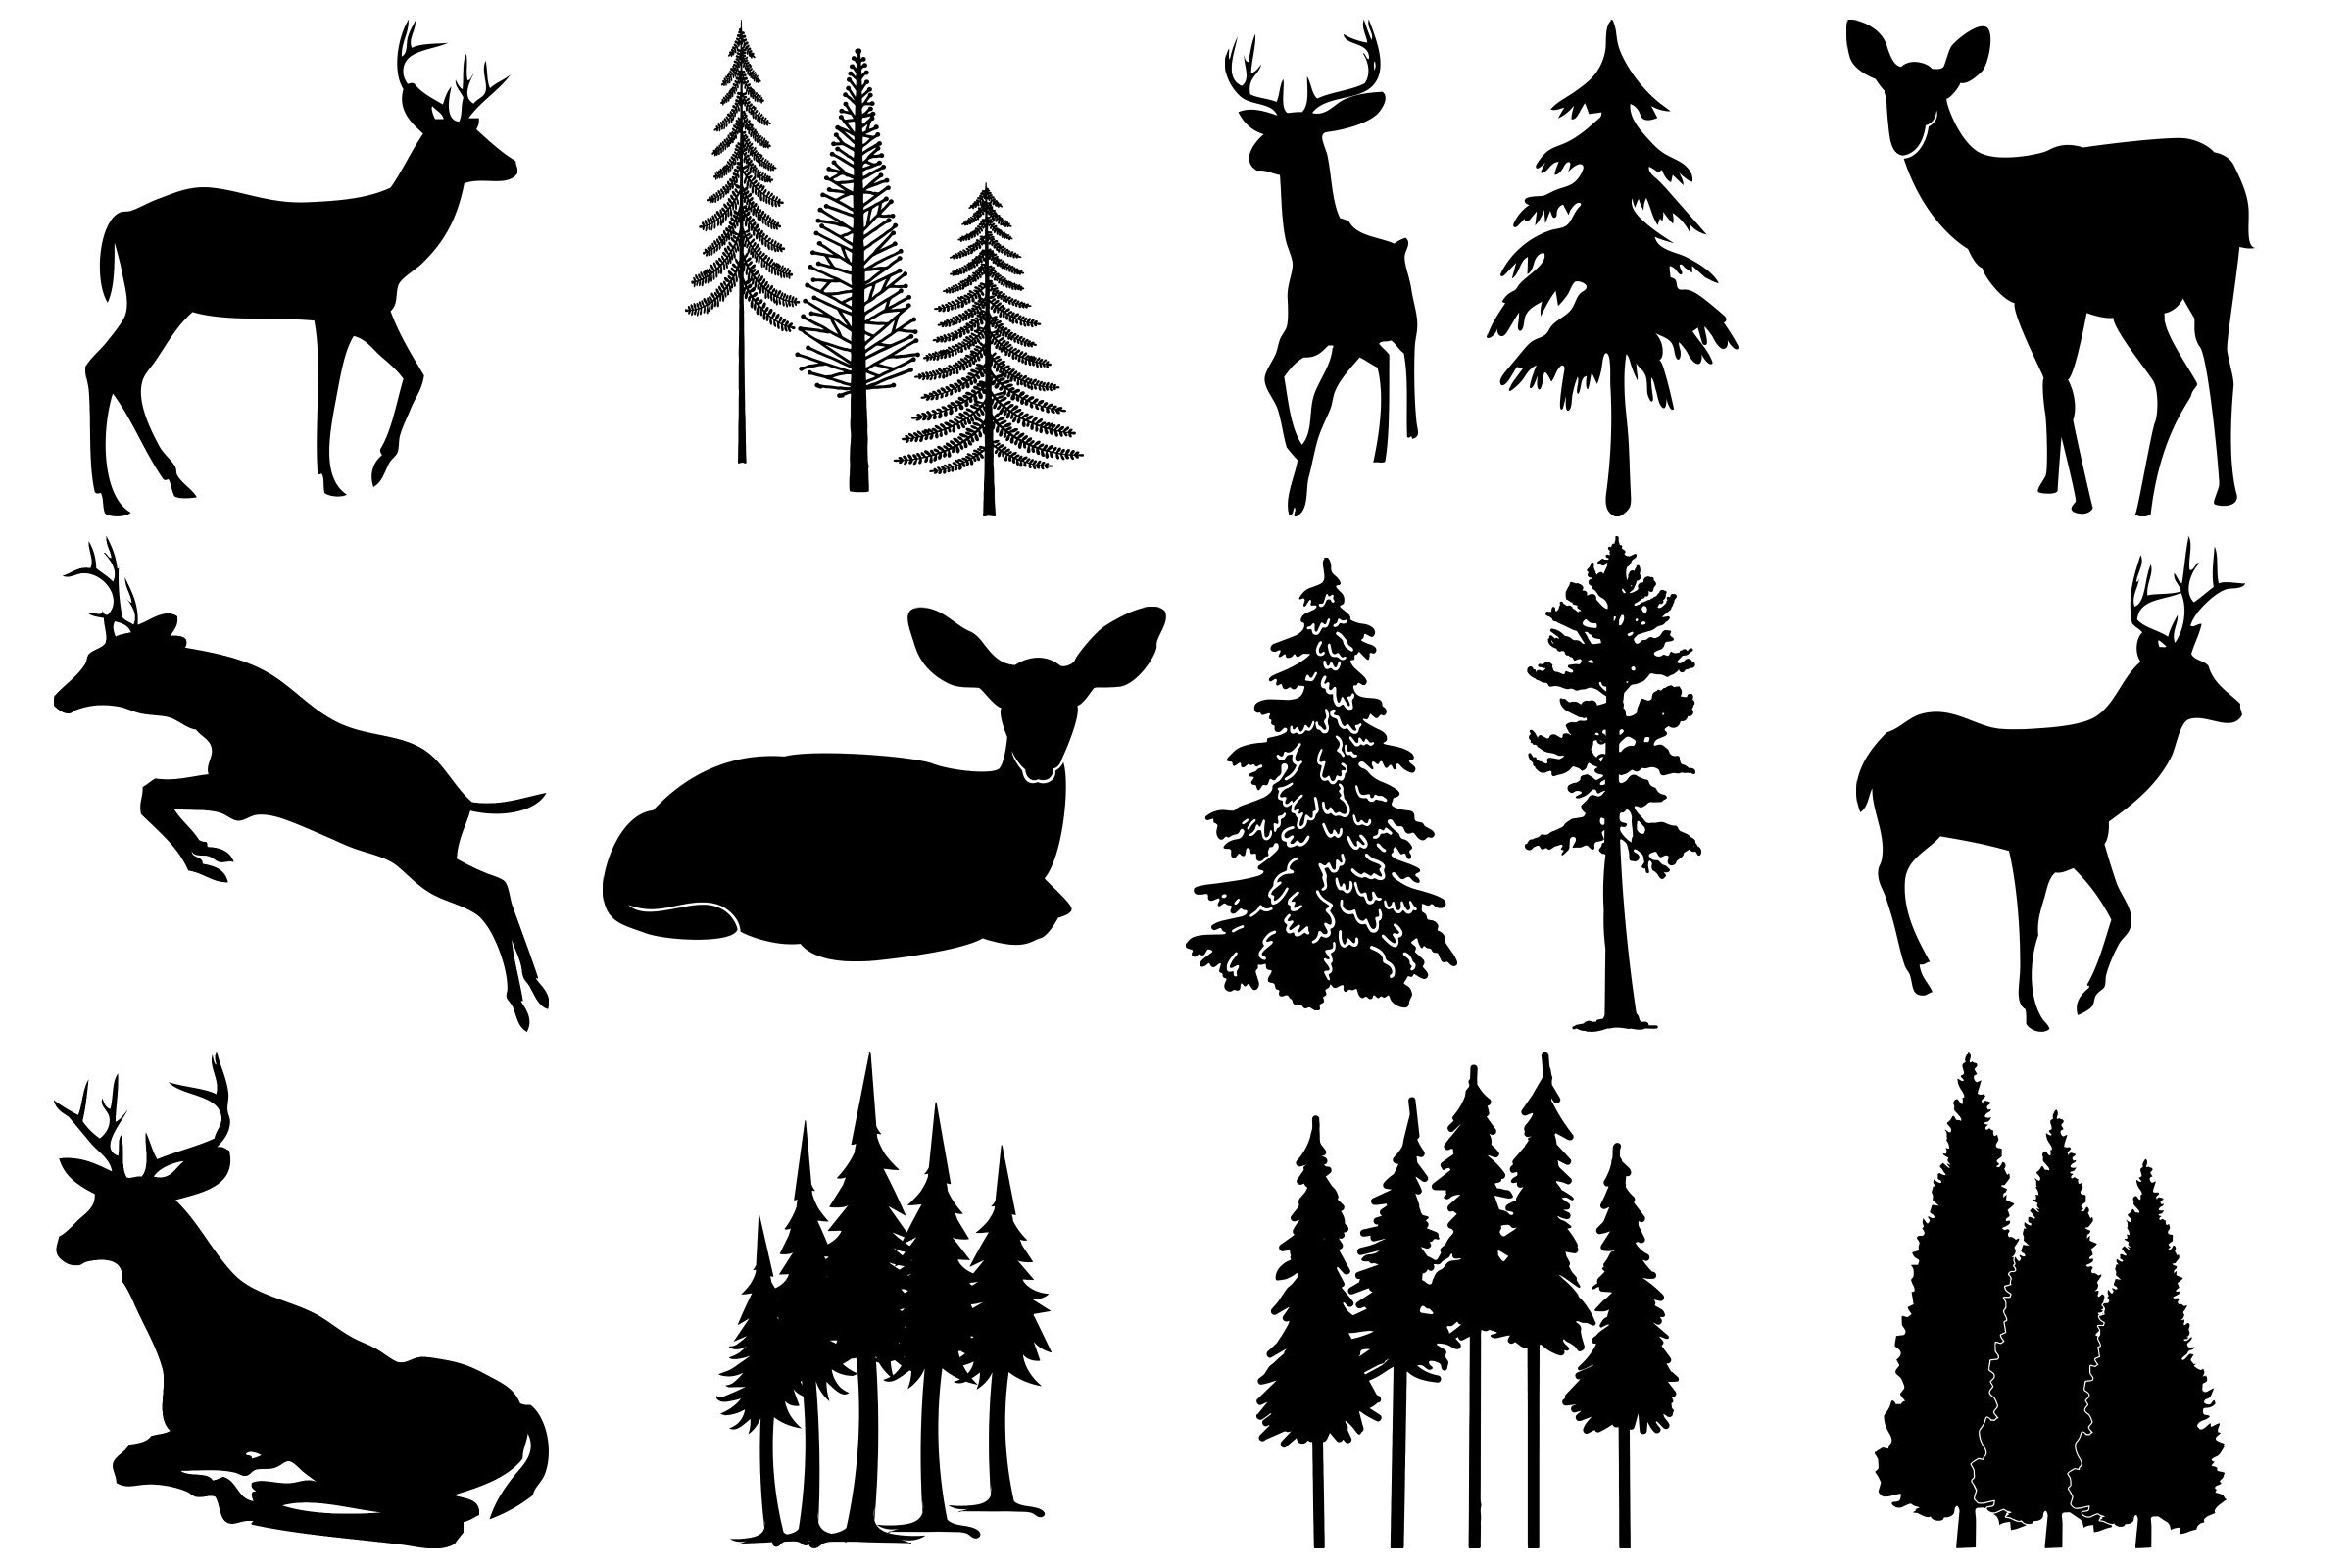 Separate elements to create a full moose composition.